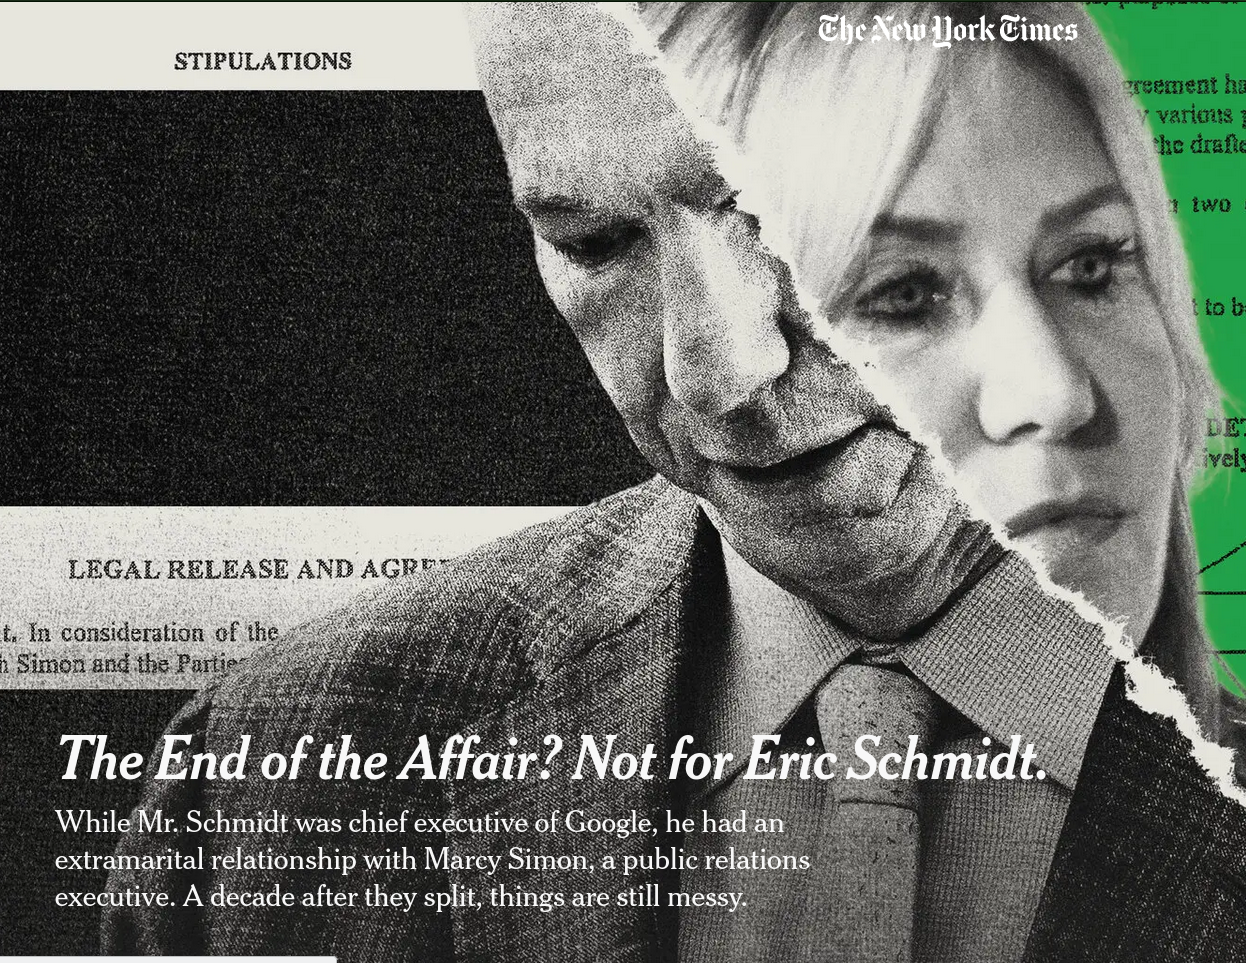 The End of the Affair? Not for Eric Schmidt.